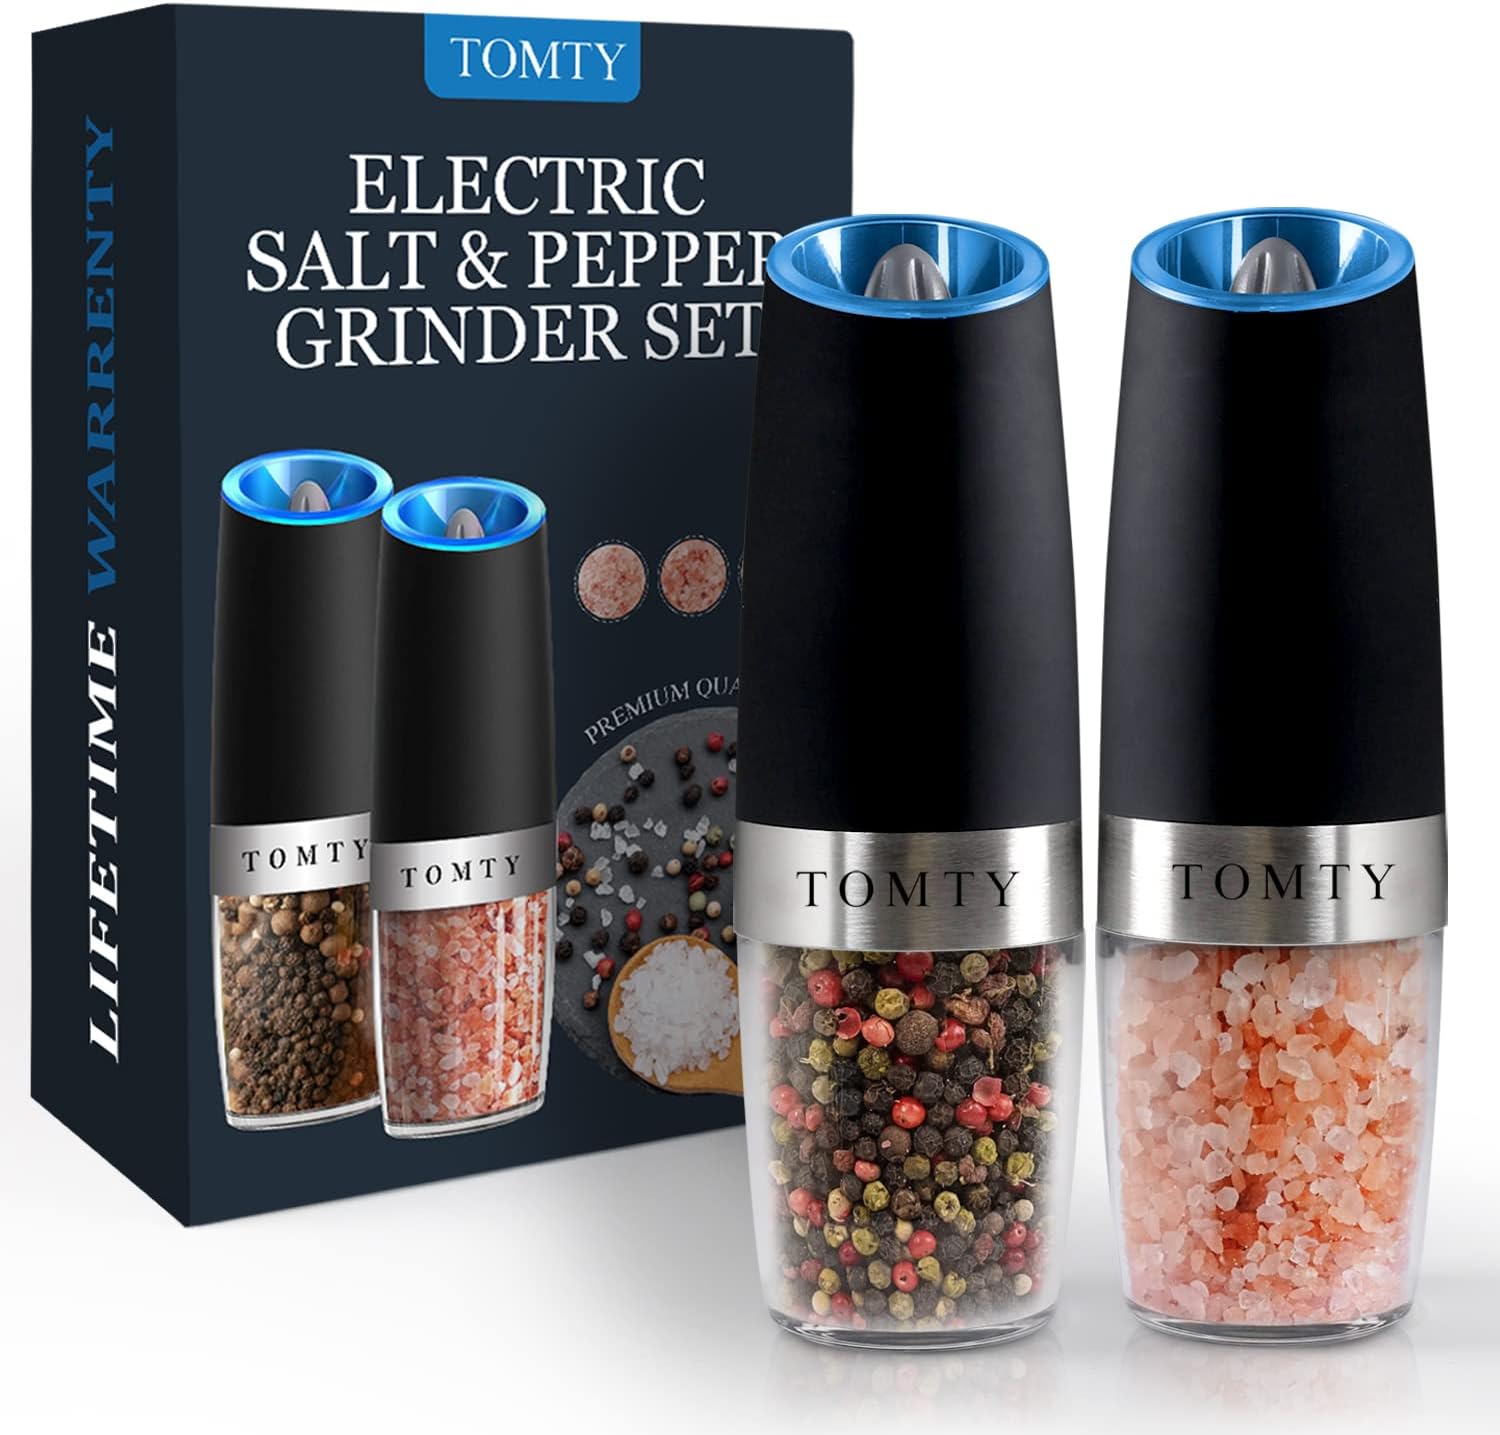 Gravity Electric Salt and Pepper Grinder Set: Ideal Gifts for Women and Men, Perfect for White Elephant, Kitchen Gadgets for Housewarming, Cooking, Grilling – Battery Operated Shakers Automatic